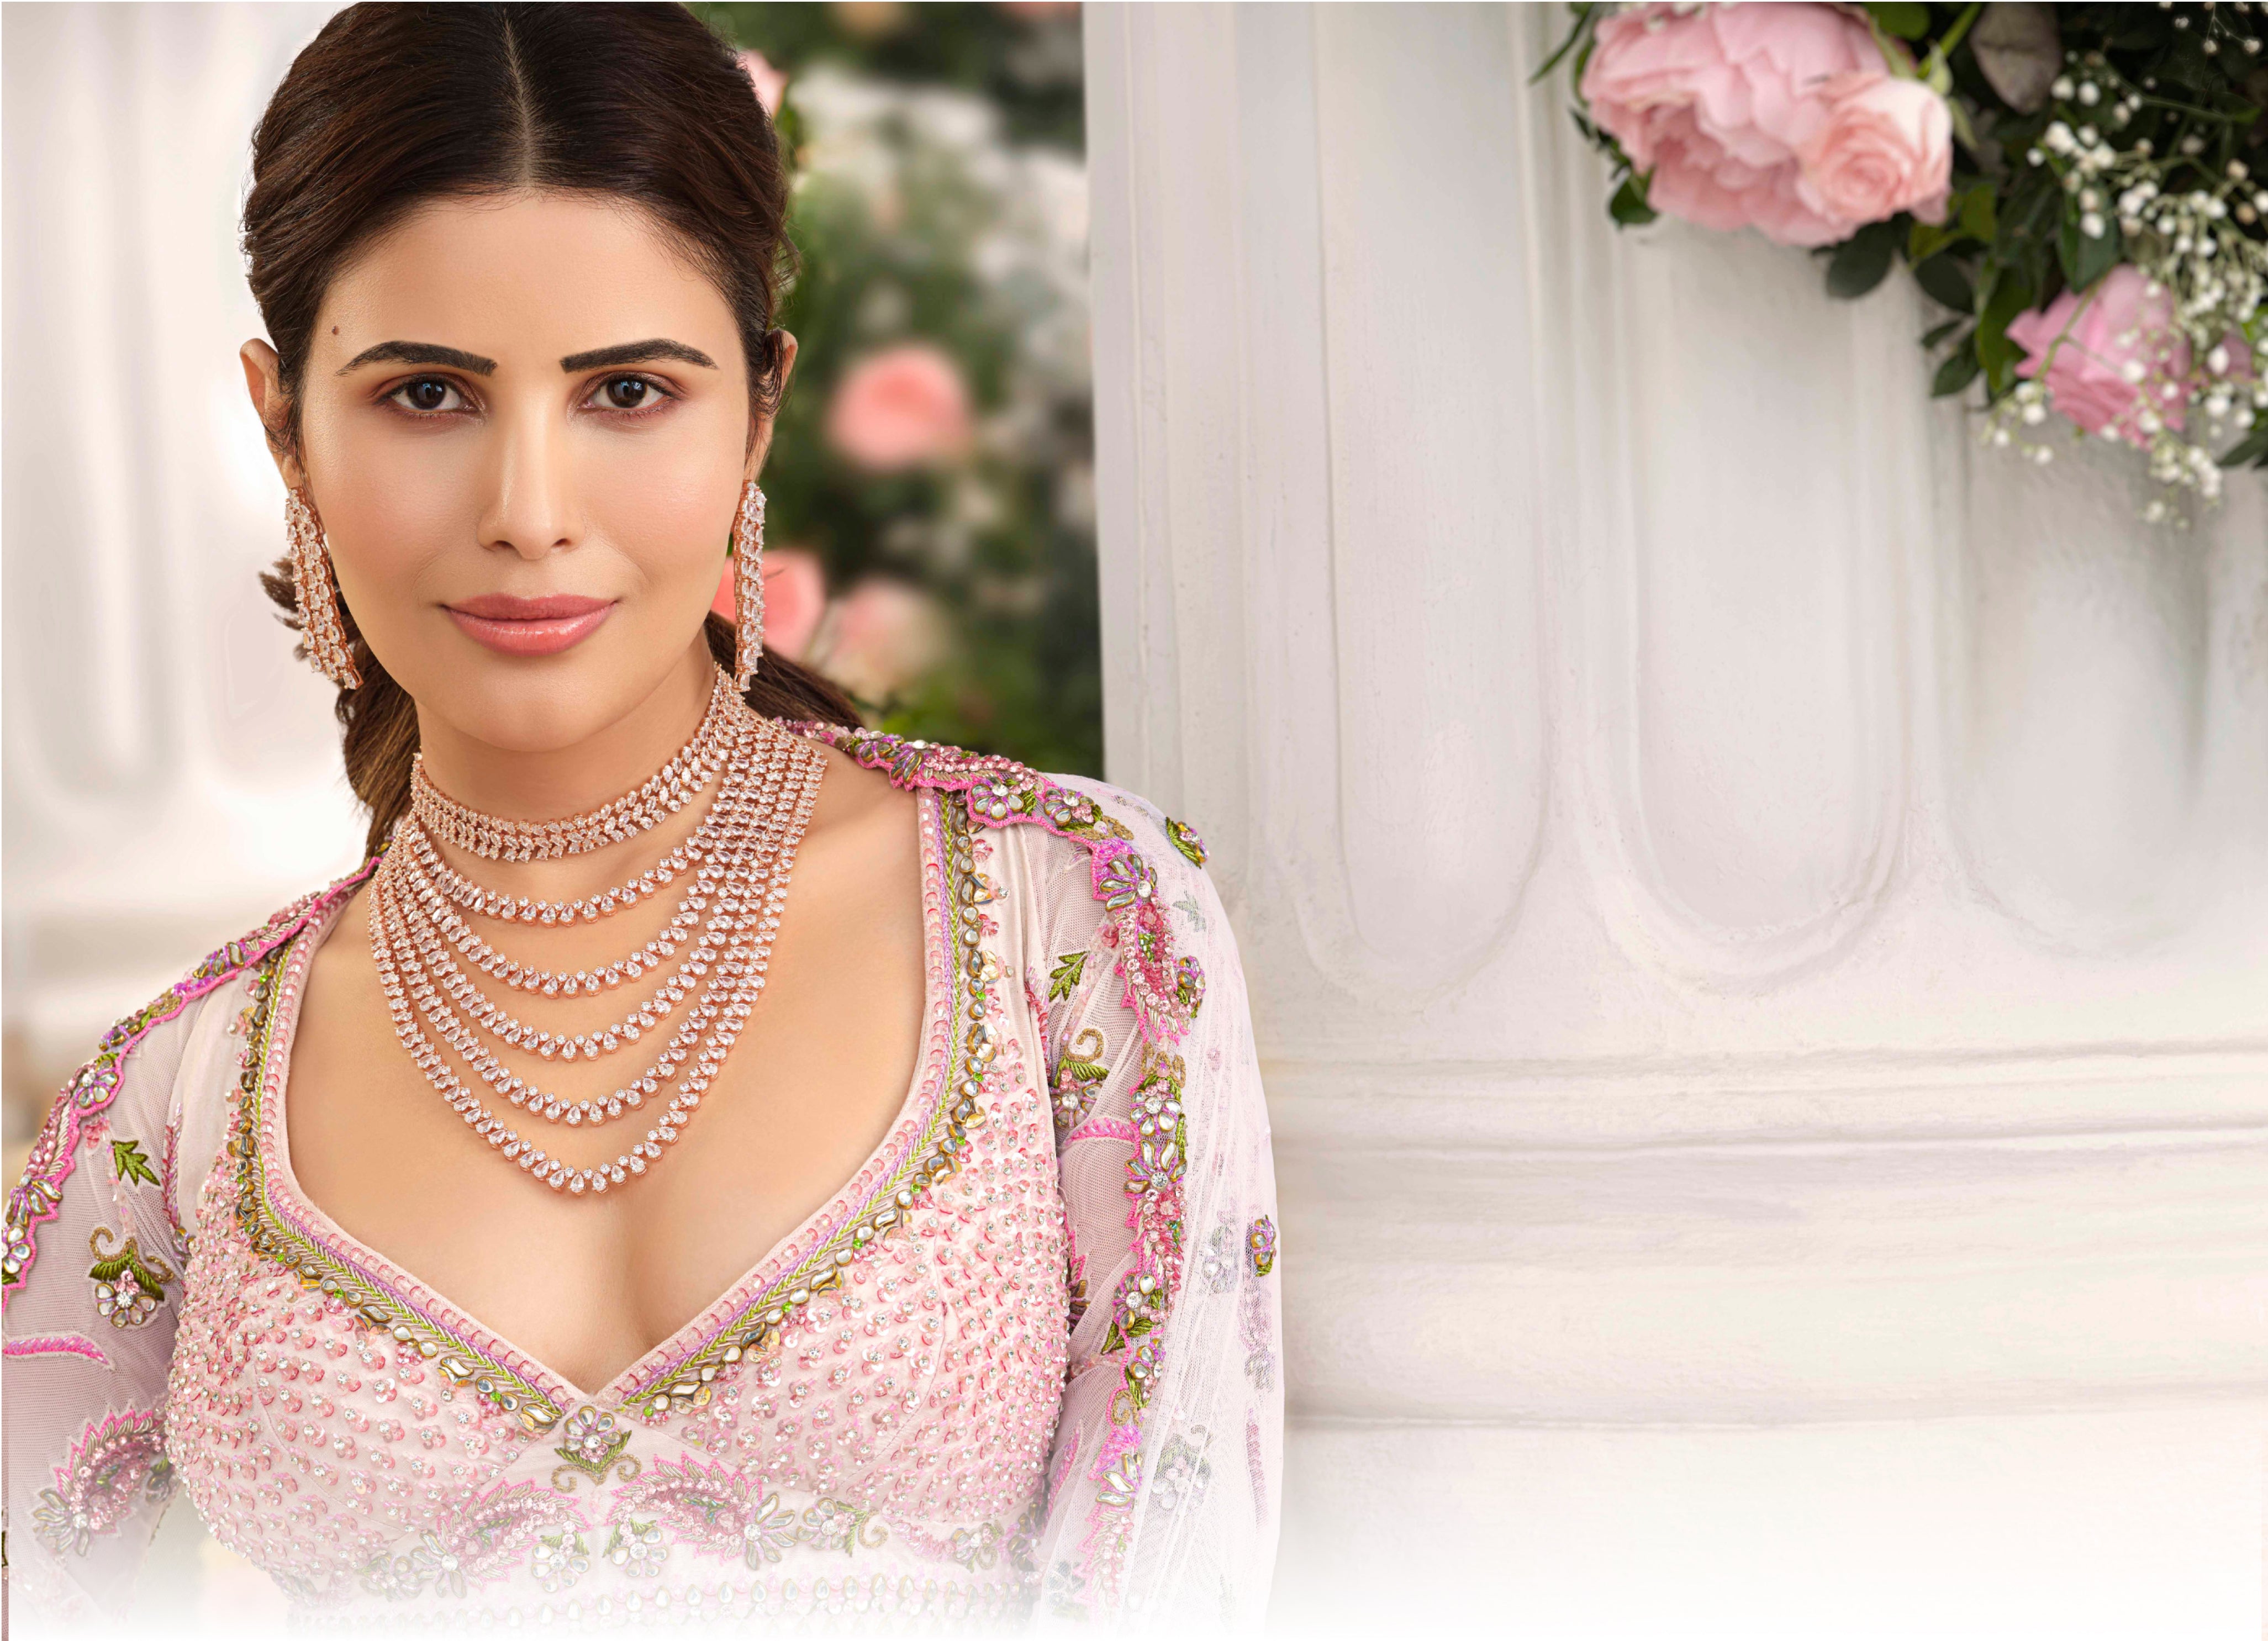 Bridal Asia - A subtle pink lehenga with striking emerald jewellery, has  made our heart skipped a beat! We love how this bride chose a classic  flushed make-up look & regal jewels